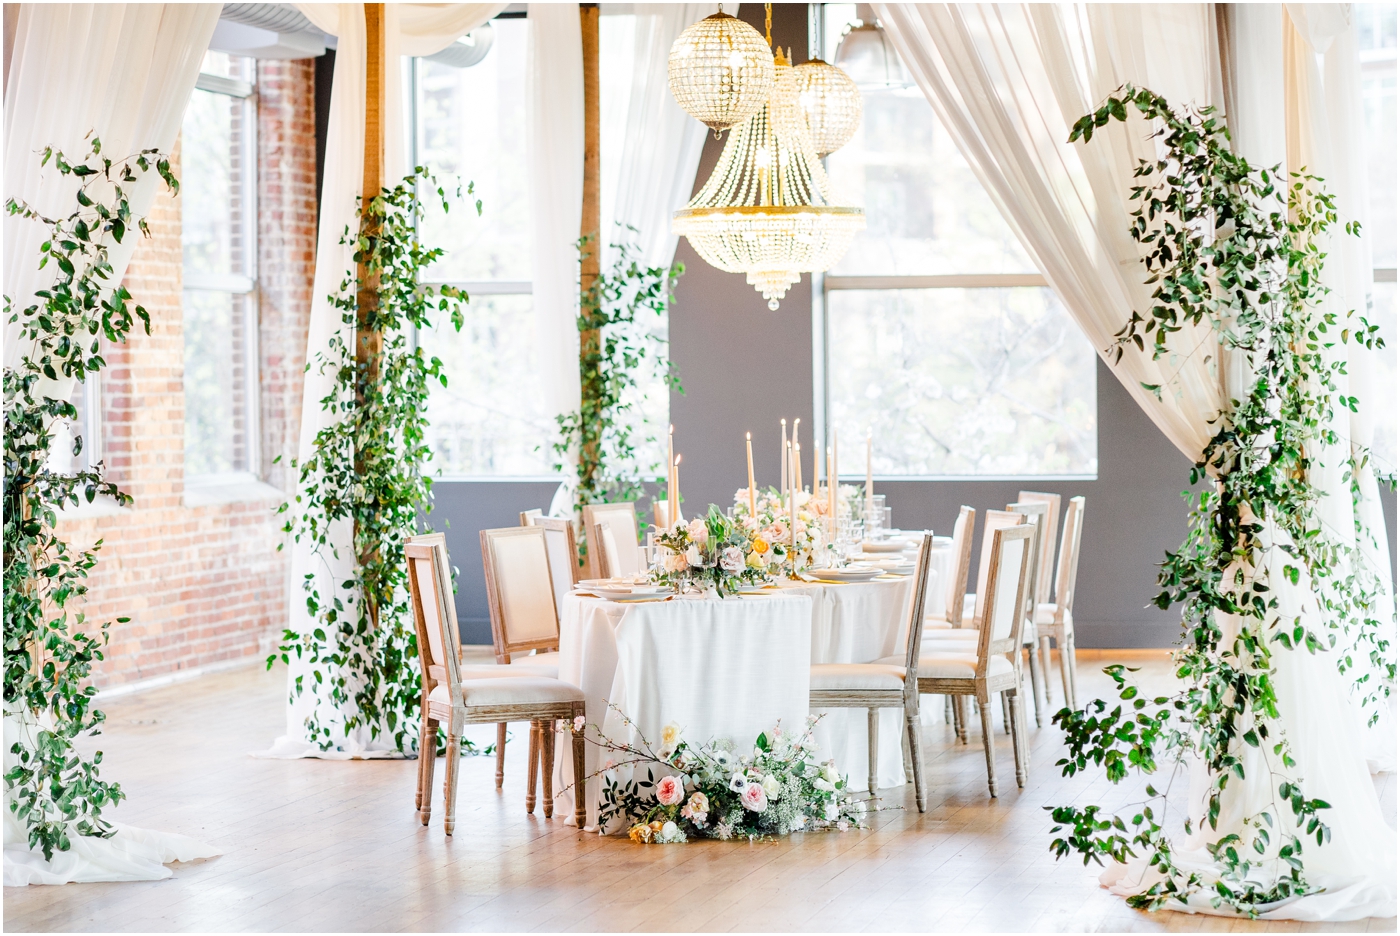 Huguenot Loft Wedding Styled Shoot with Serpentine Tables in Downtown Greenville, SC